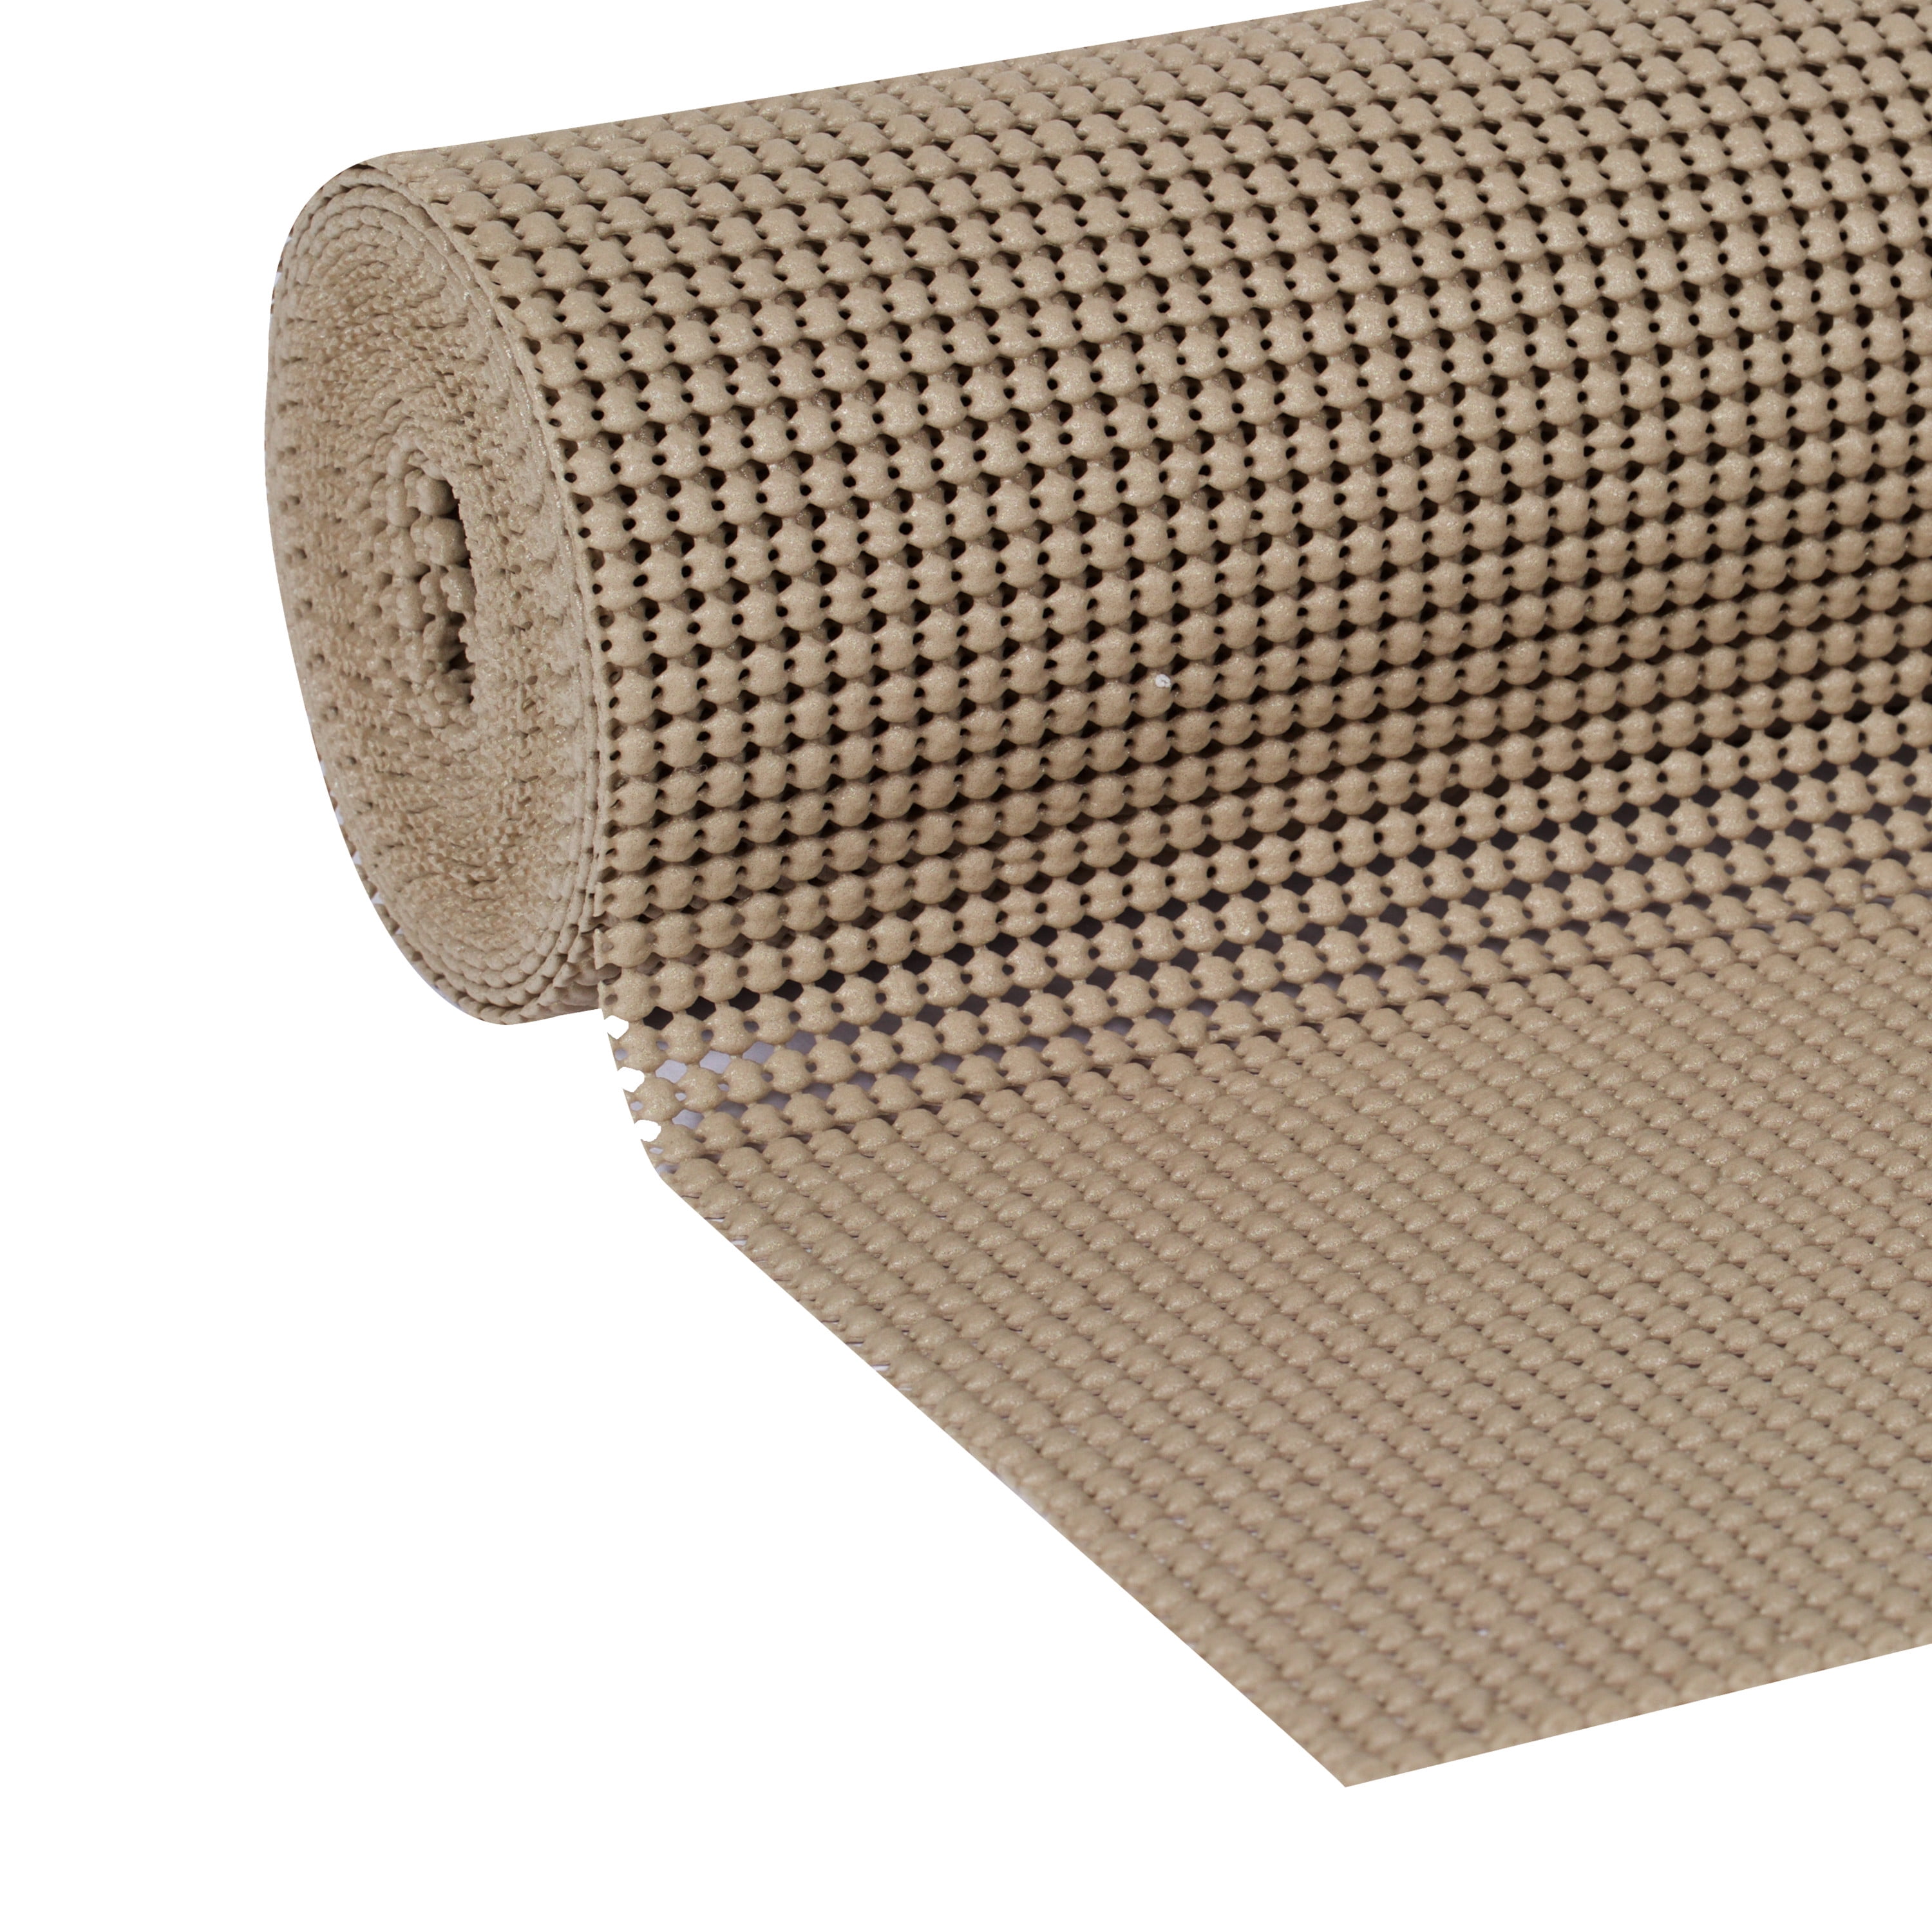 Toolbox Taupe Grip Liner Details about   2 Pack Duck Brand Drawer & Shelf Liner 12" x 10 Ft 